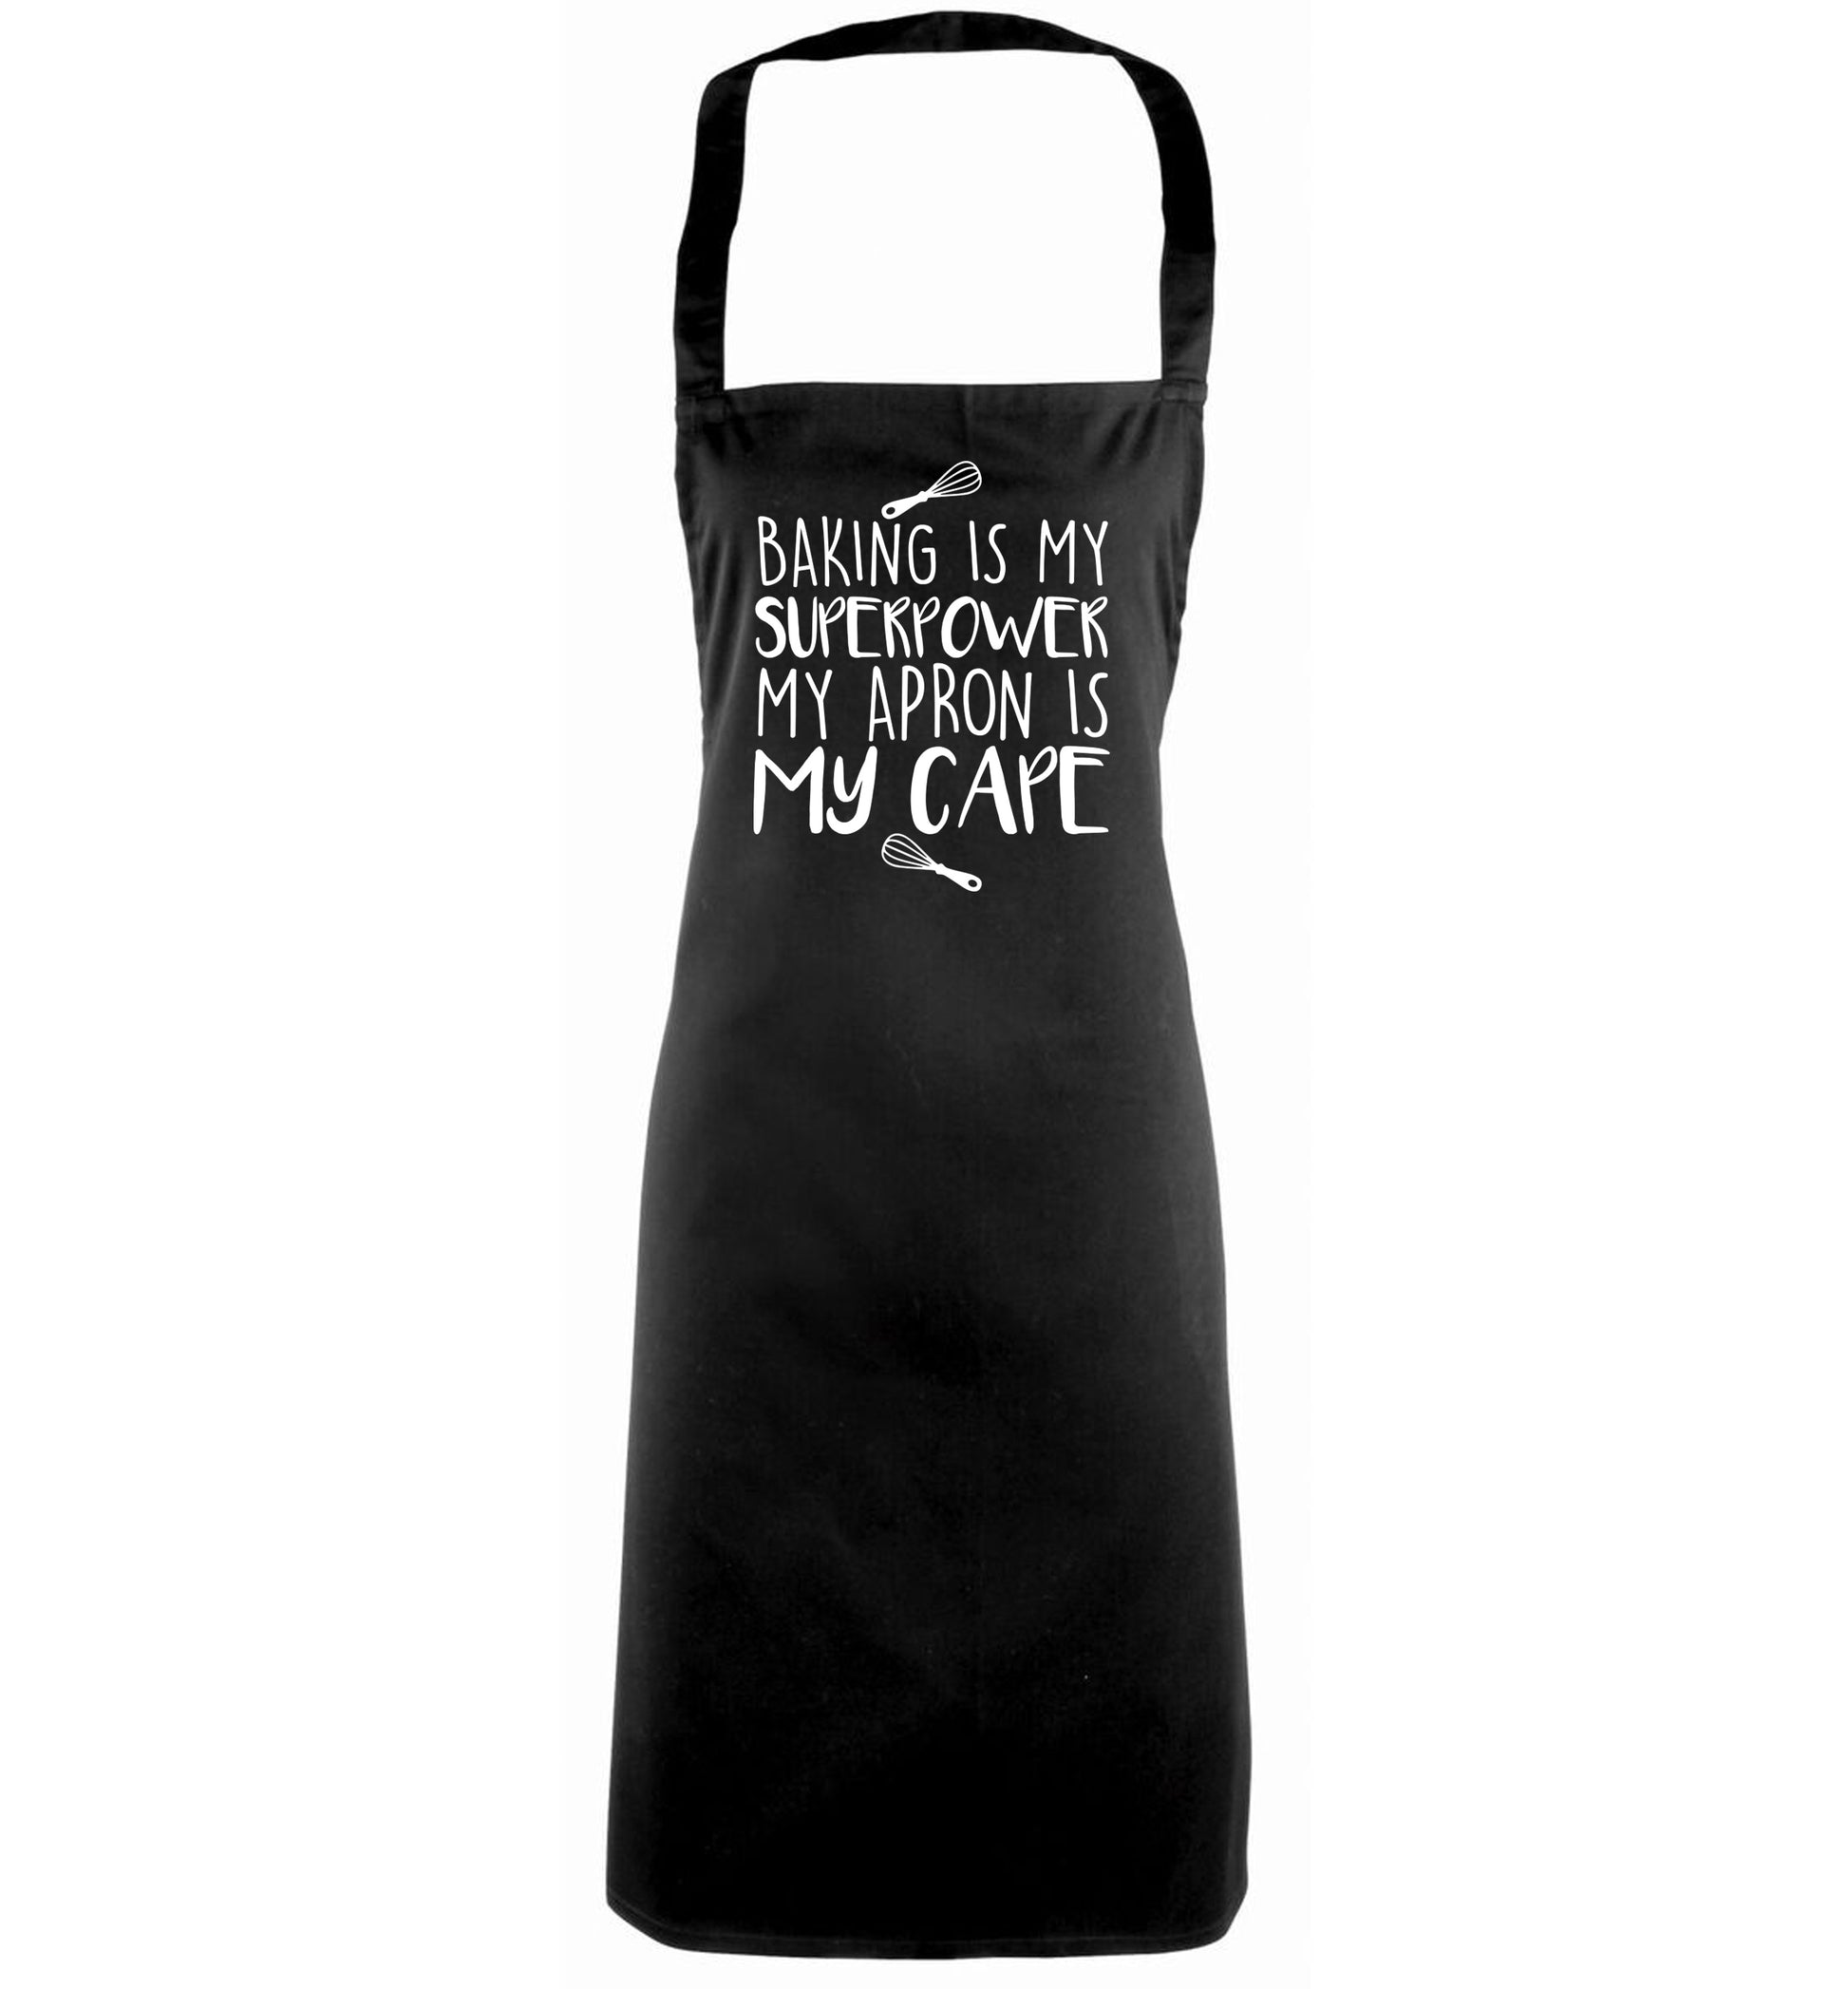 Baking is my superpower my apron is my cape black apron